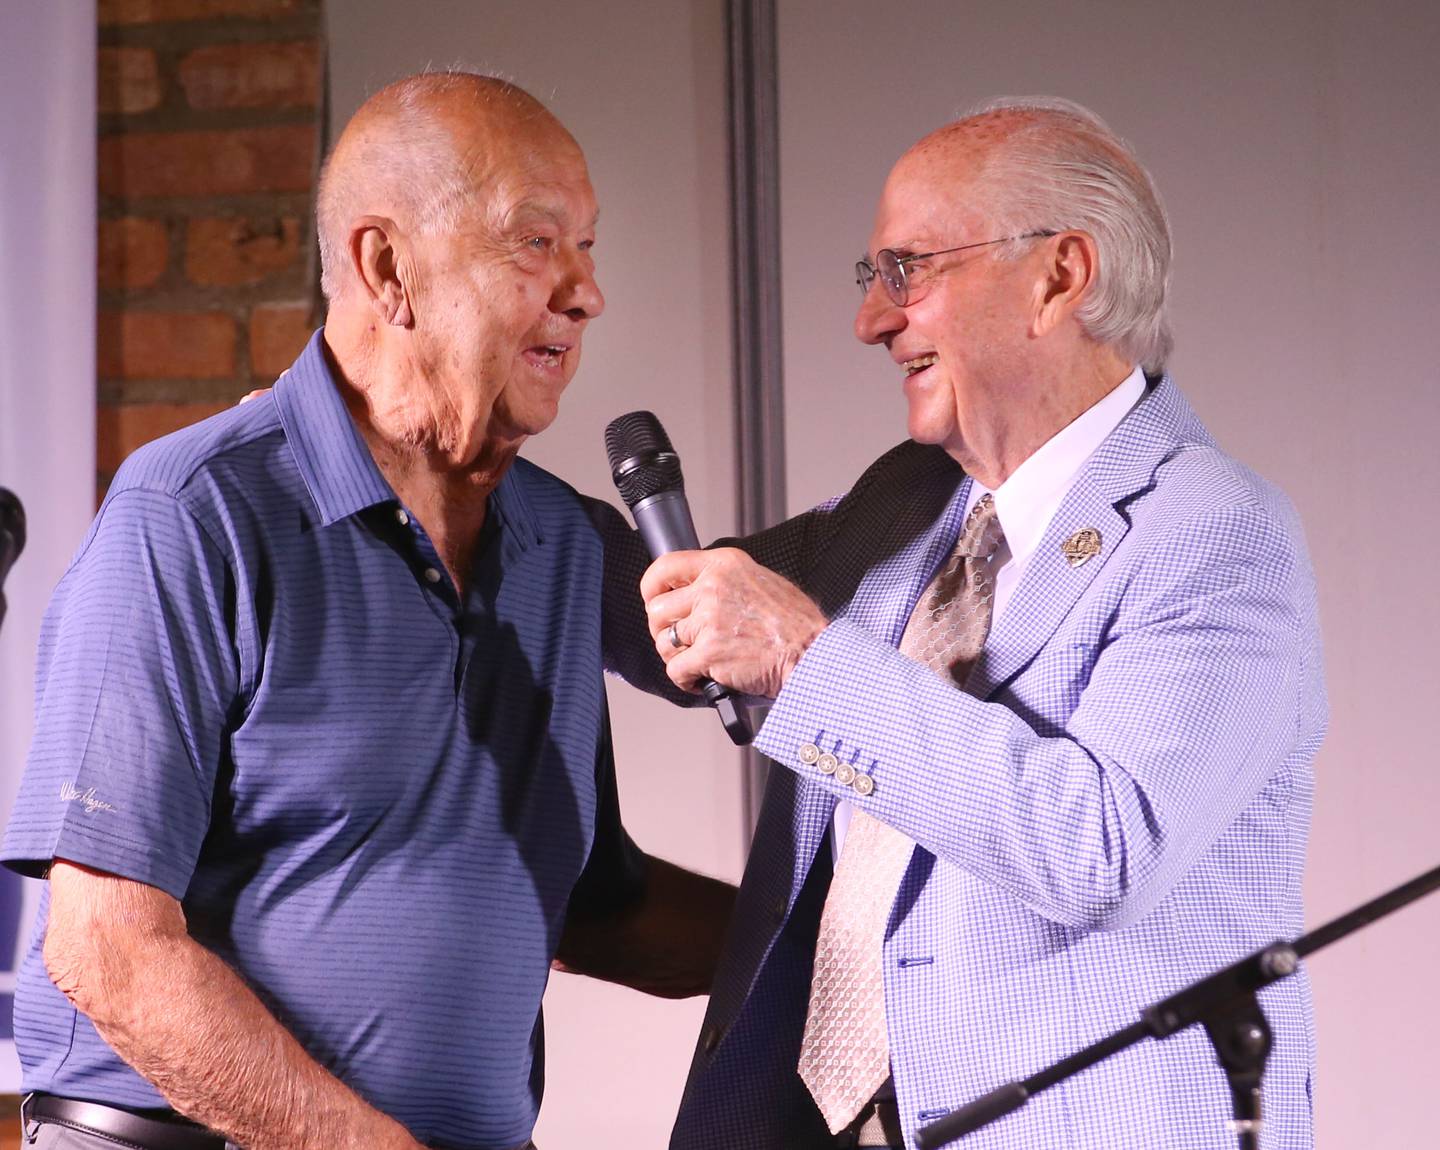 Bob Prusator, legendary basketball coach at Tiskilwa High School is interviewed by Lanny Slevin Emcee, during the Shaw Media Illinois Valley Sports Hall of Fame on Thursday, June 8, 2023 at the Auditorium Ballroom in La Salle.